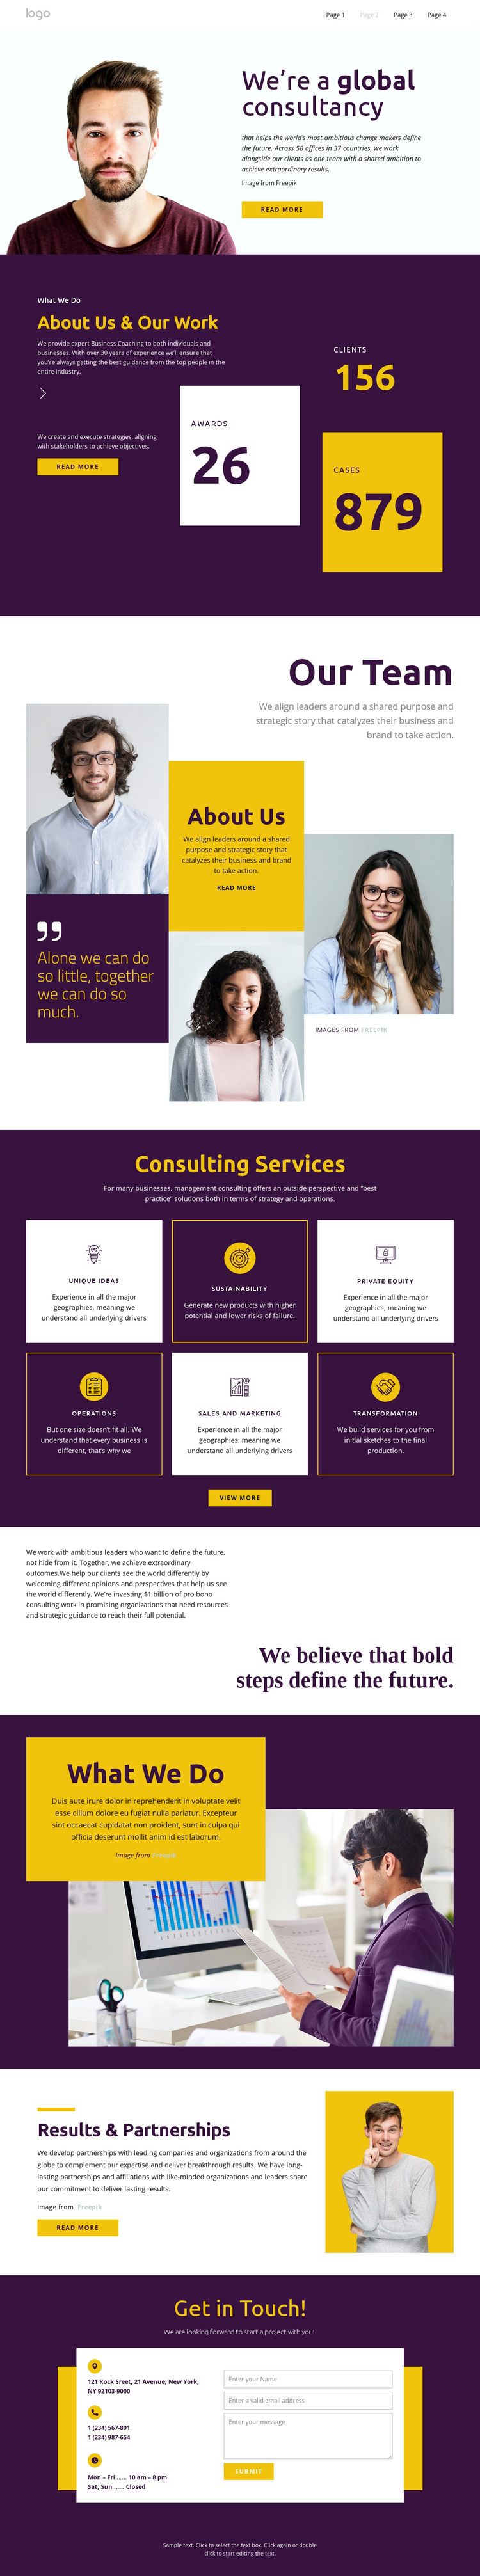 Consultants for big business Web Design